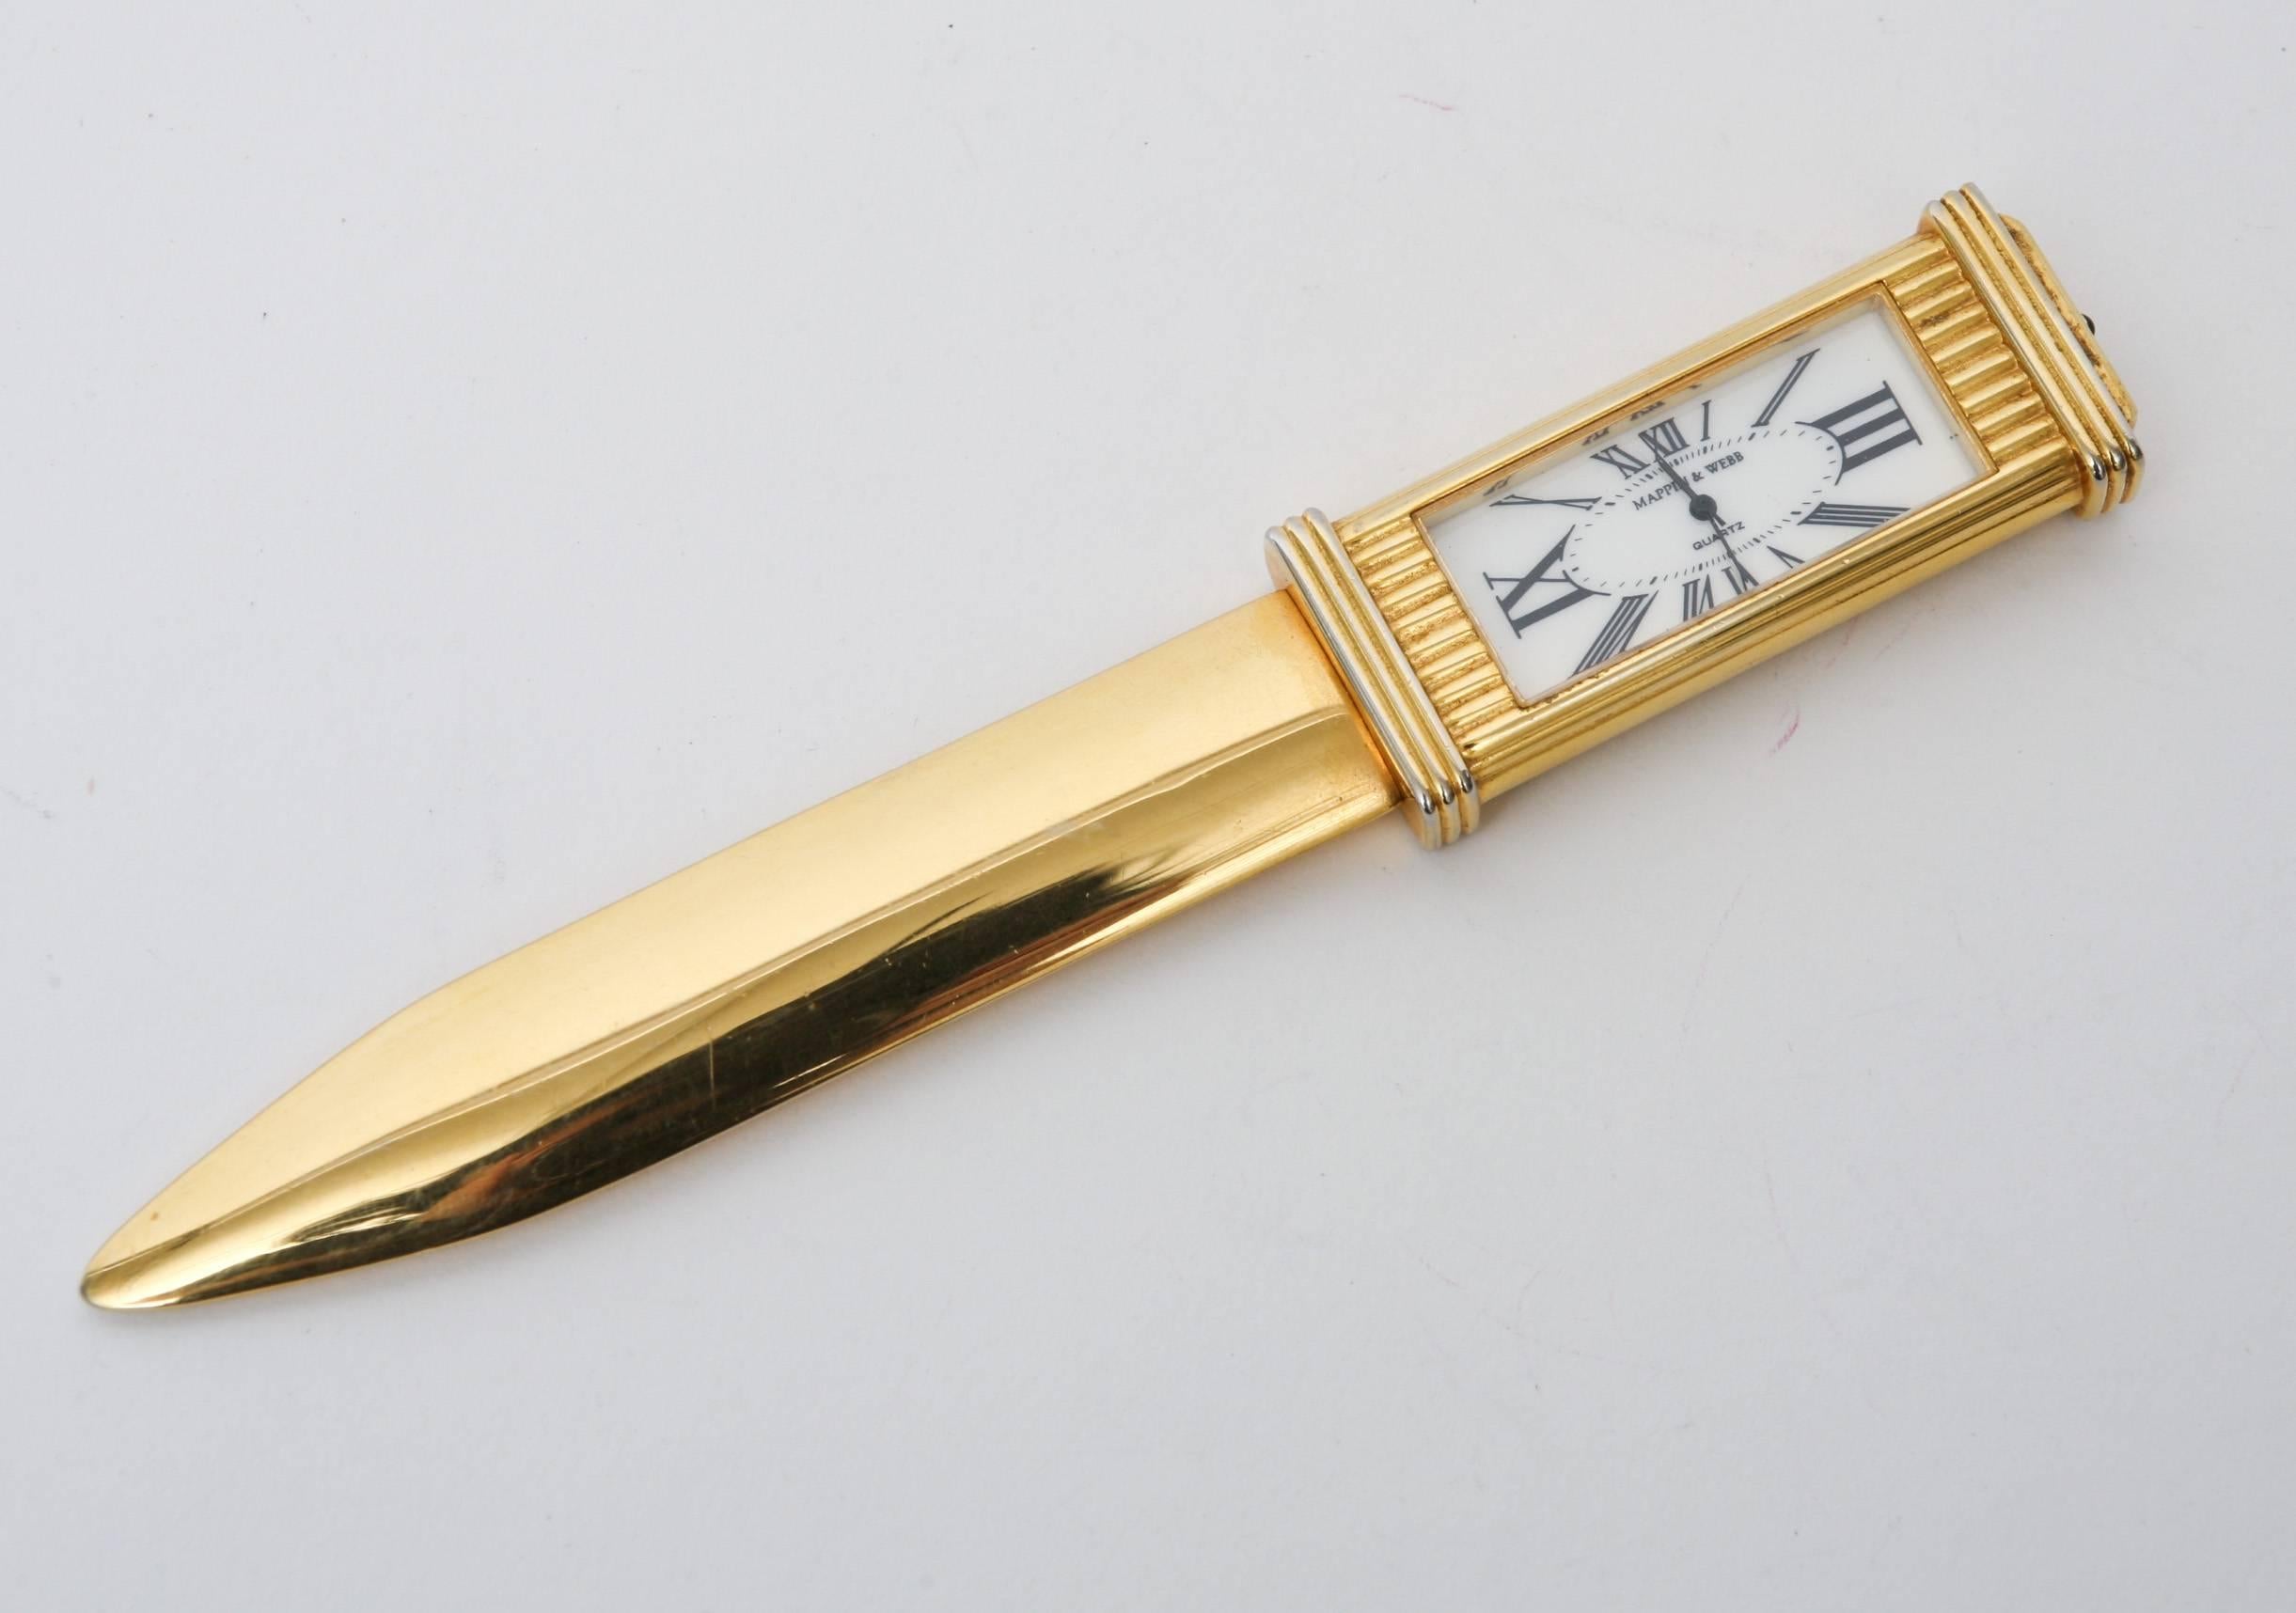 This rare and fantastic Mappin & Webb clock letter opener is finely made. The roman numerals on the clock give regality and a Cartier style. There is a glass
front to the clock.
It is 22-carat gold-plated. We have not re-plated this as it would